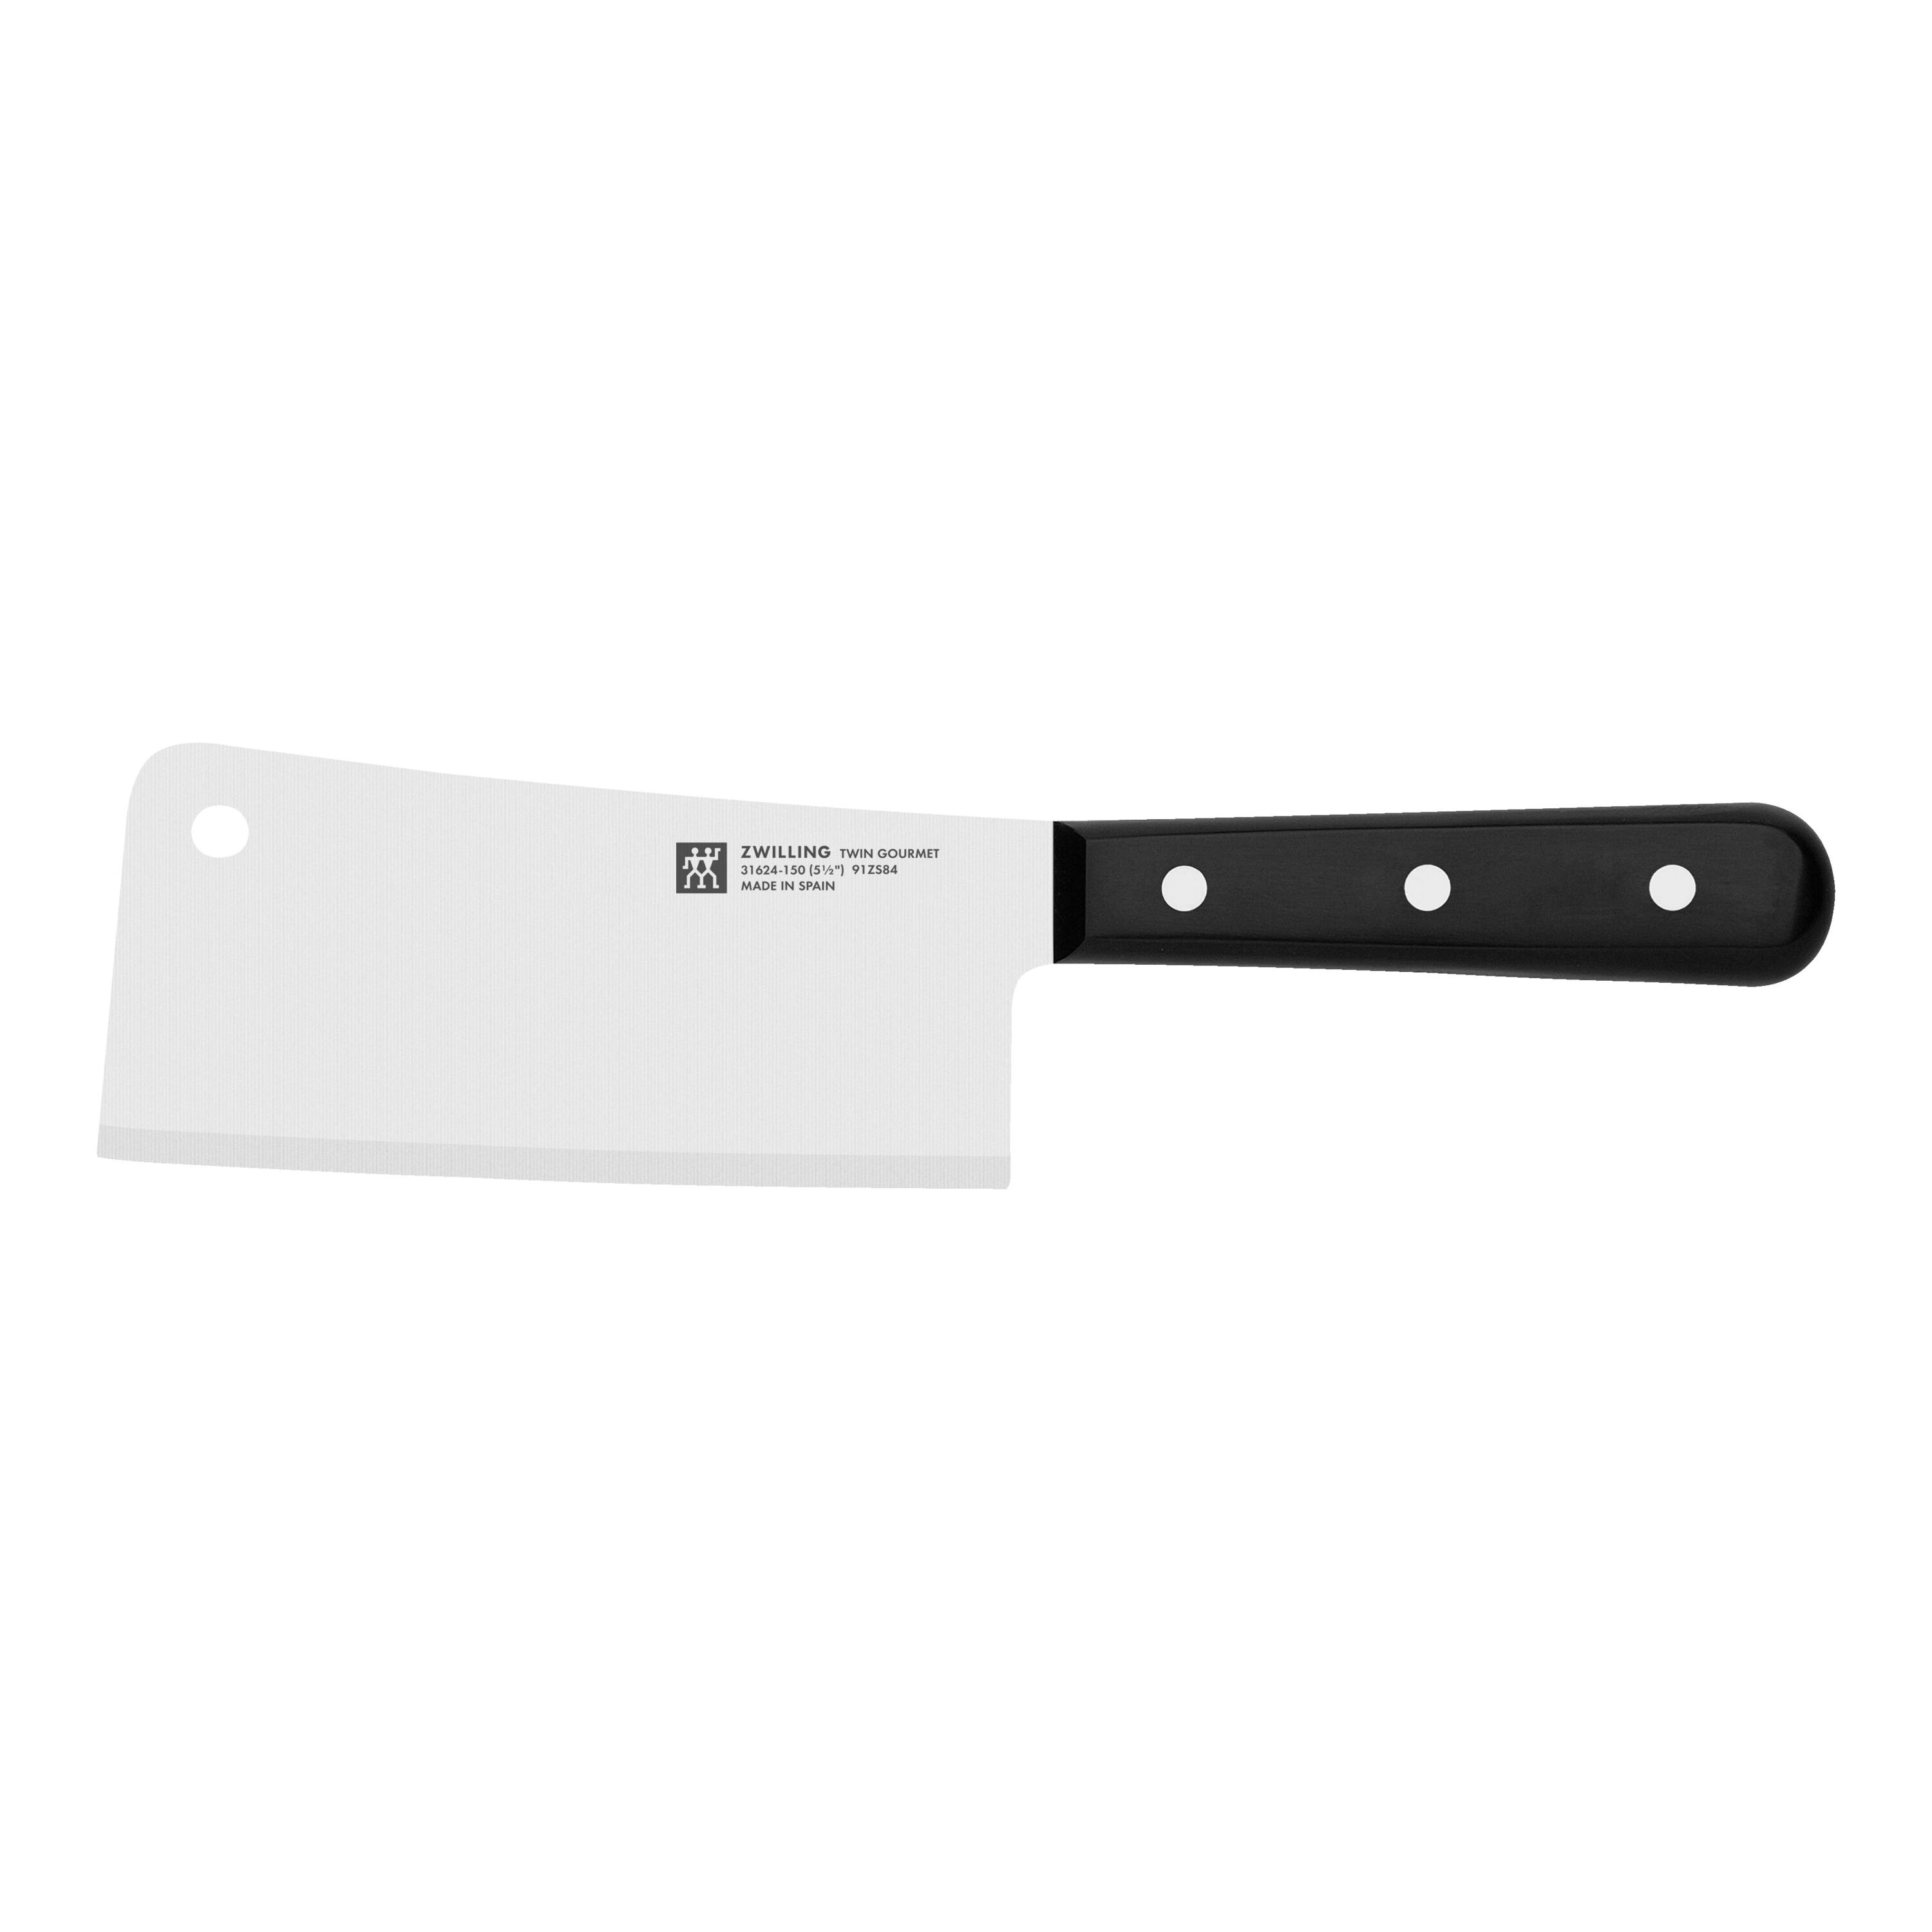 ZWILLING TWIN Gourmet 6-inch, Meat Cleaver